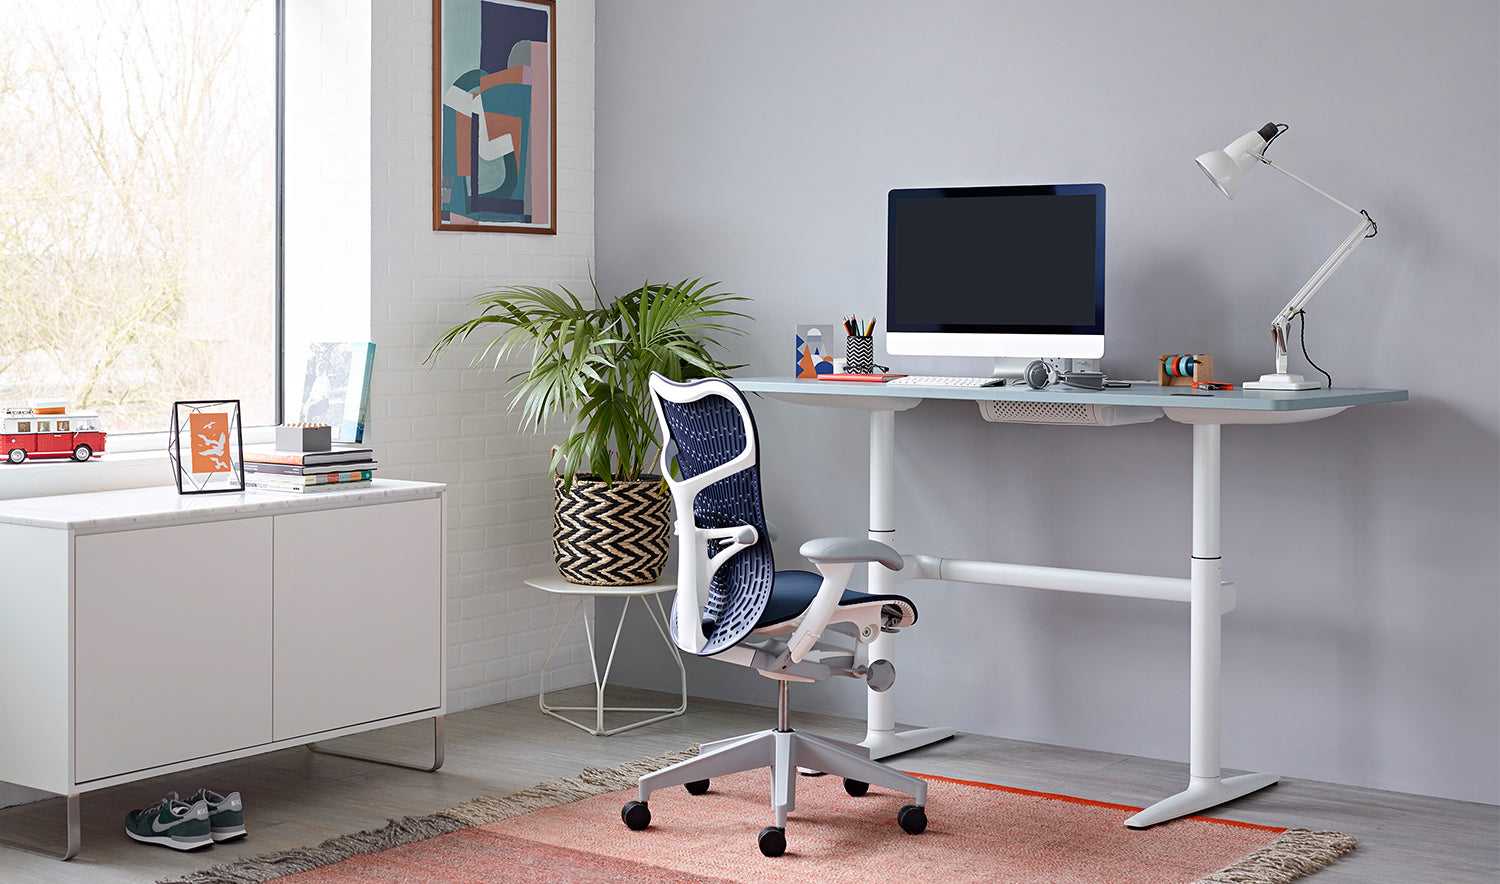 White and twilight Mirra 2 chair in a home office environment.